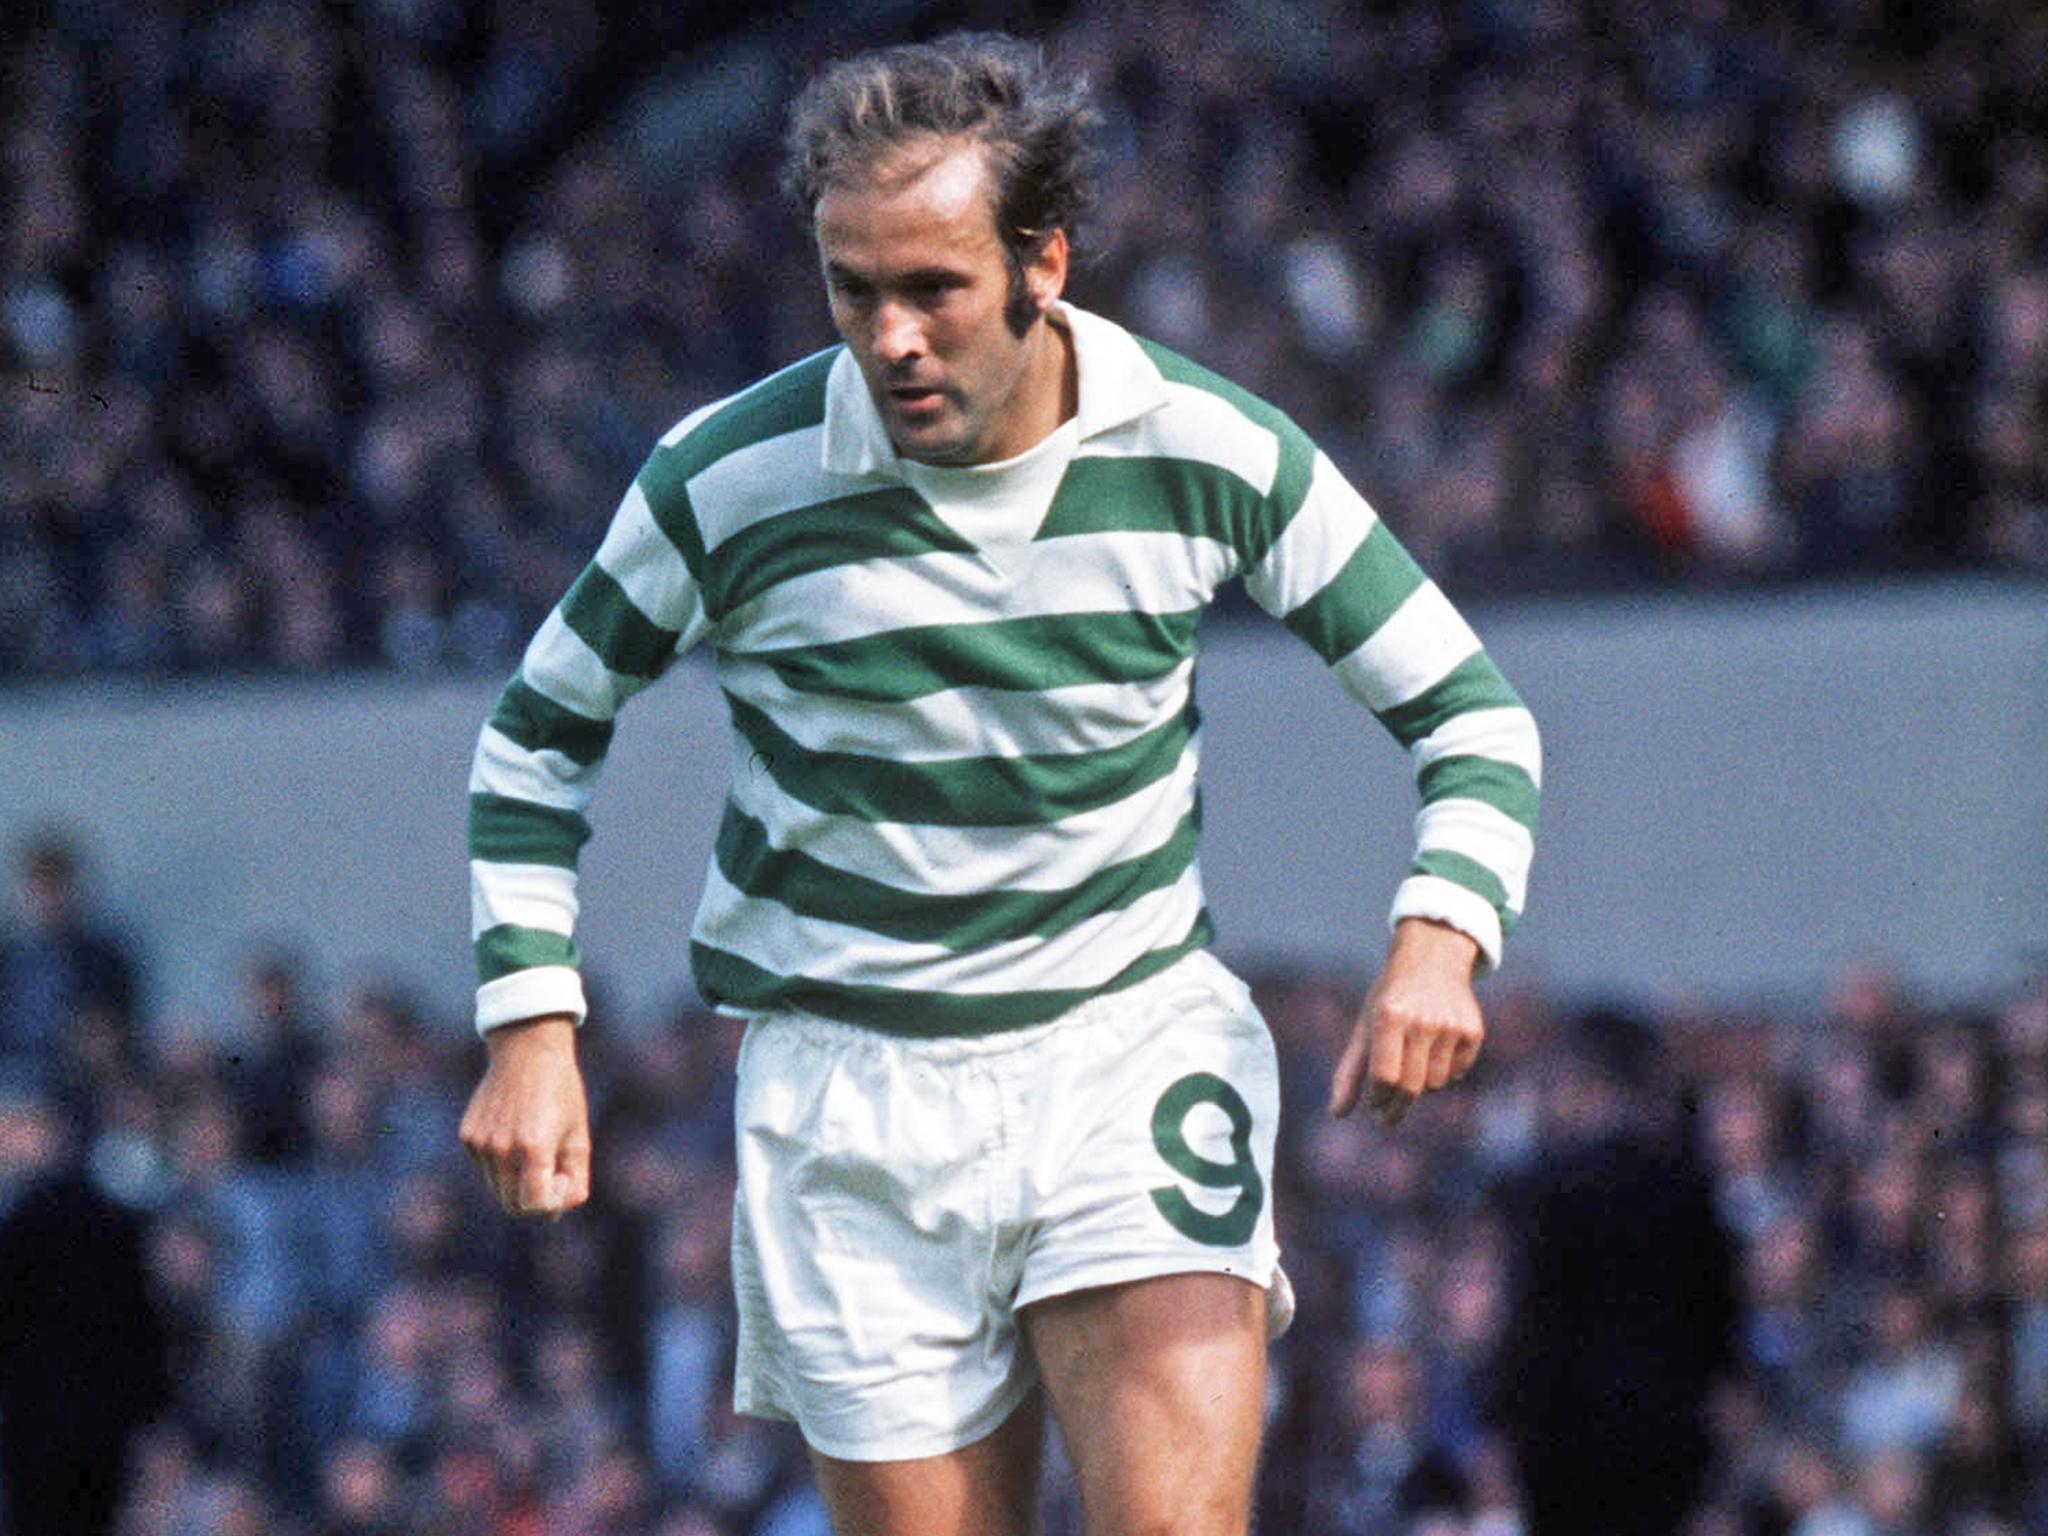 Hood, seen in action for Celtic in 1974, scored 123 goals for the Glasgow club